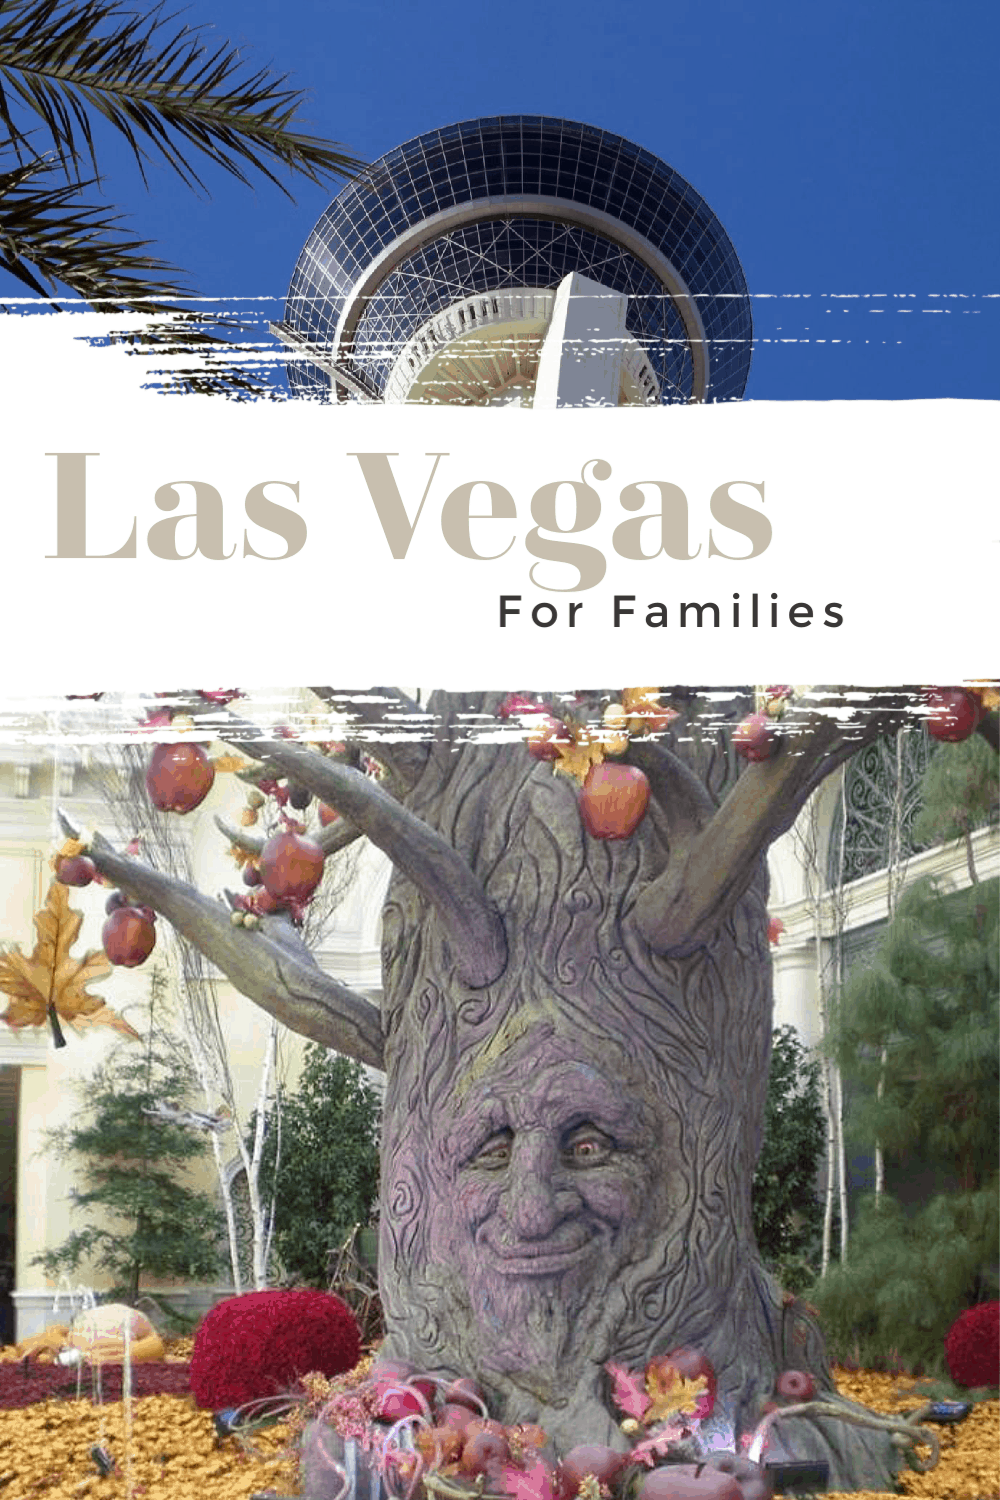 Las Vegas what to do for families with teens